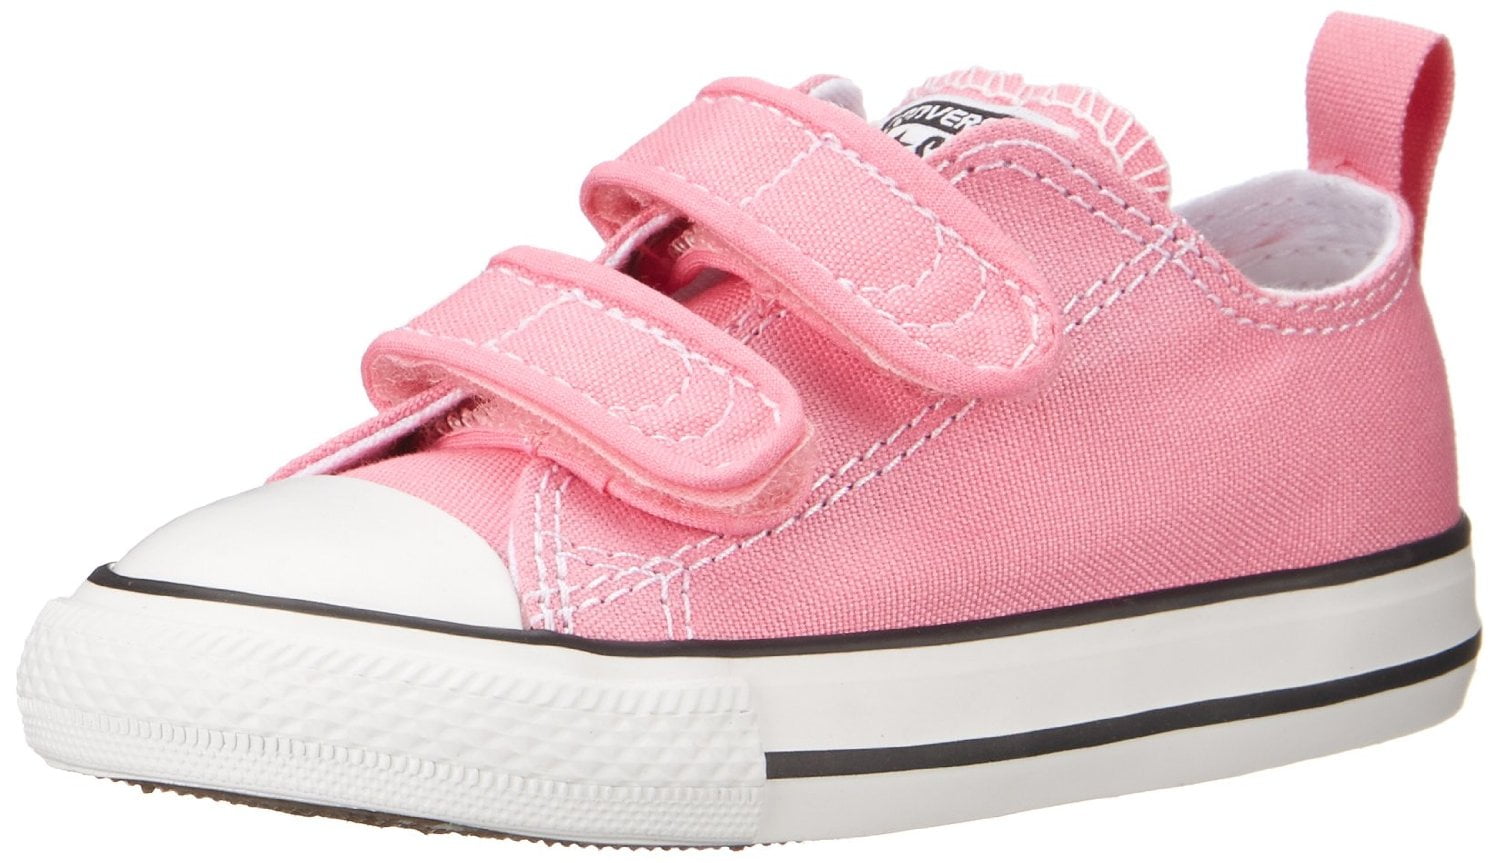 Converse Infant/Toddler Chuck Taylor All Star 2V, Pink